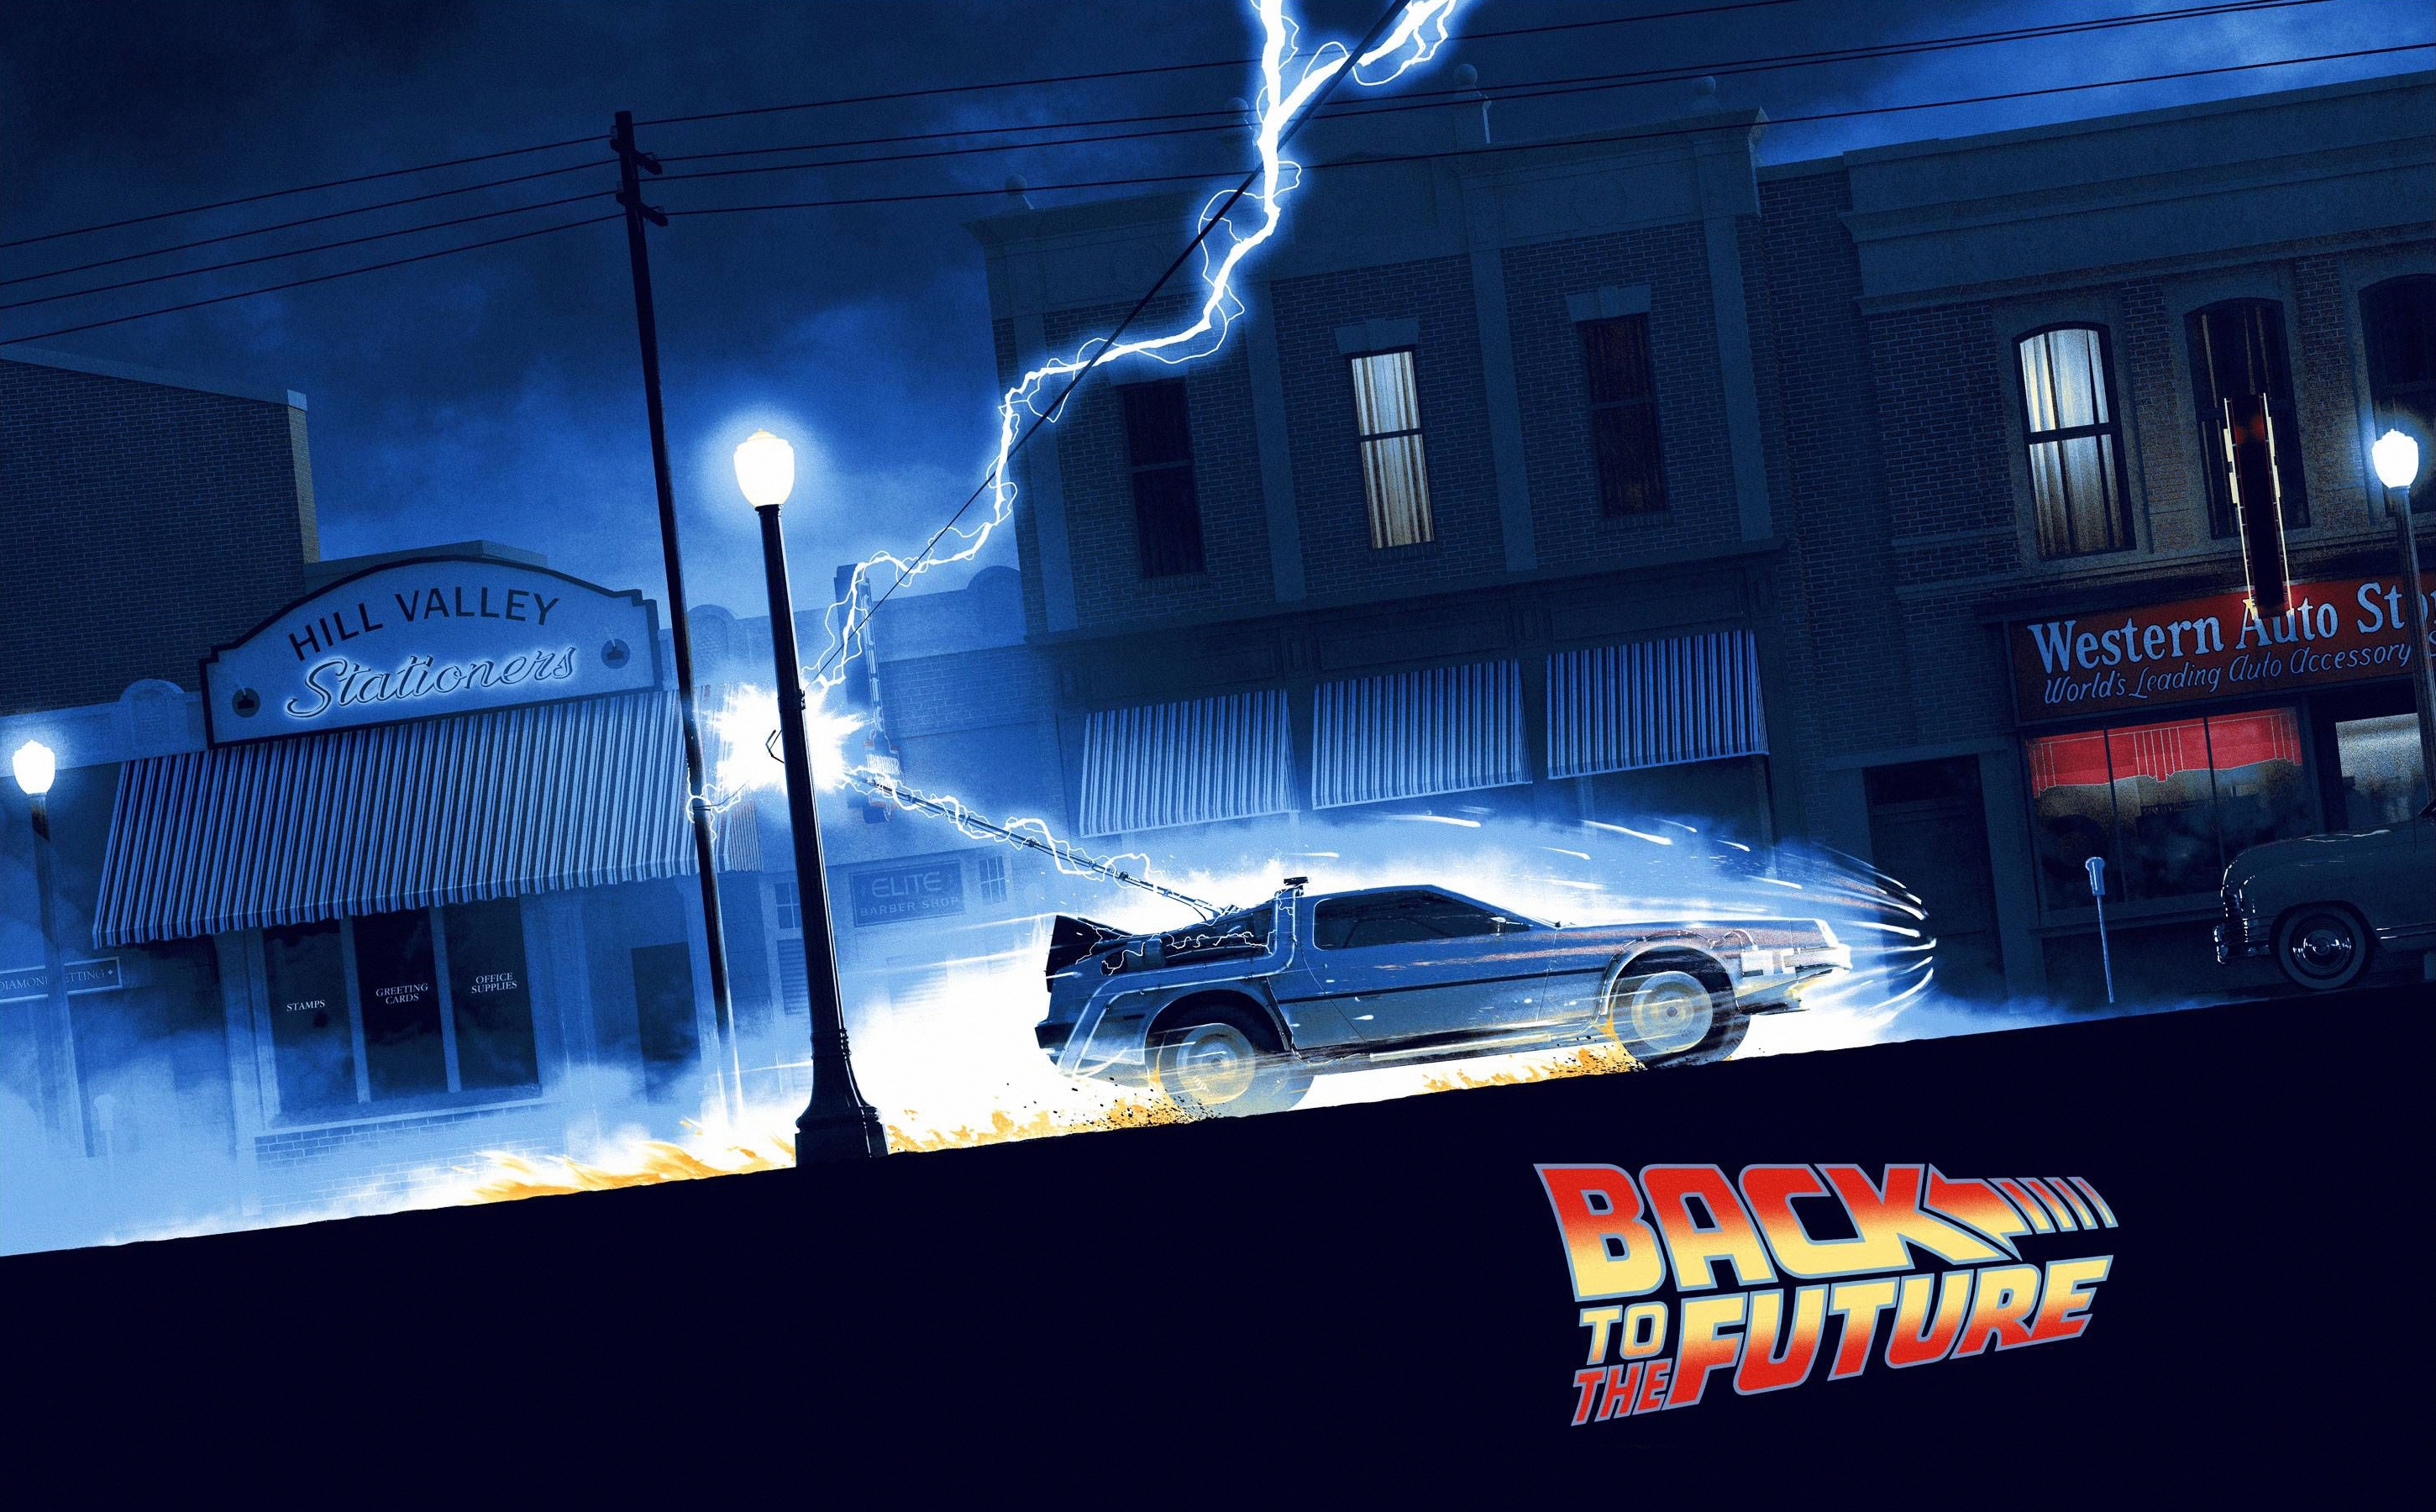 General 2900x1800 Back to the Future 1985 (Year) movies Time Machine artwork DeLorean car lightning vehicle